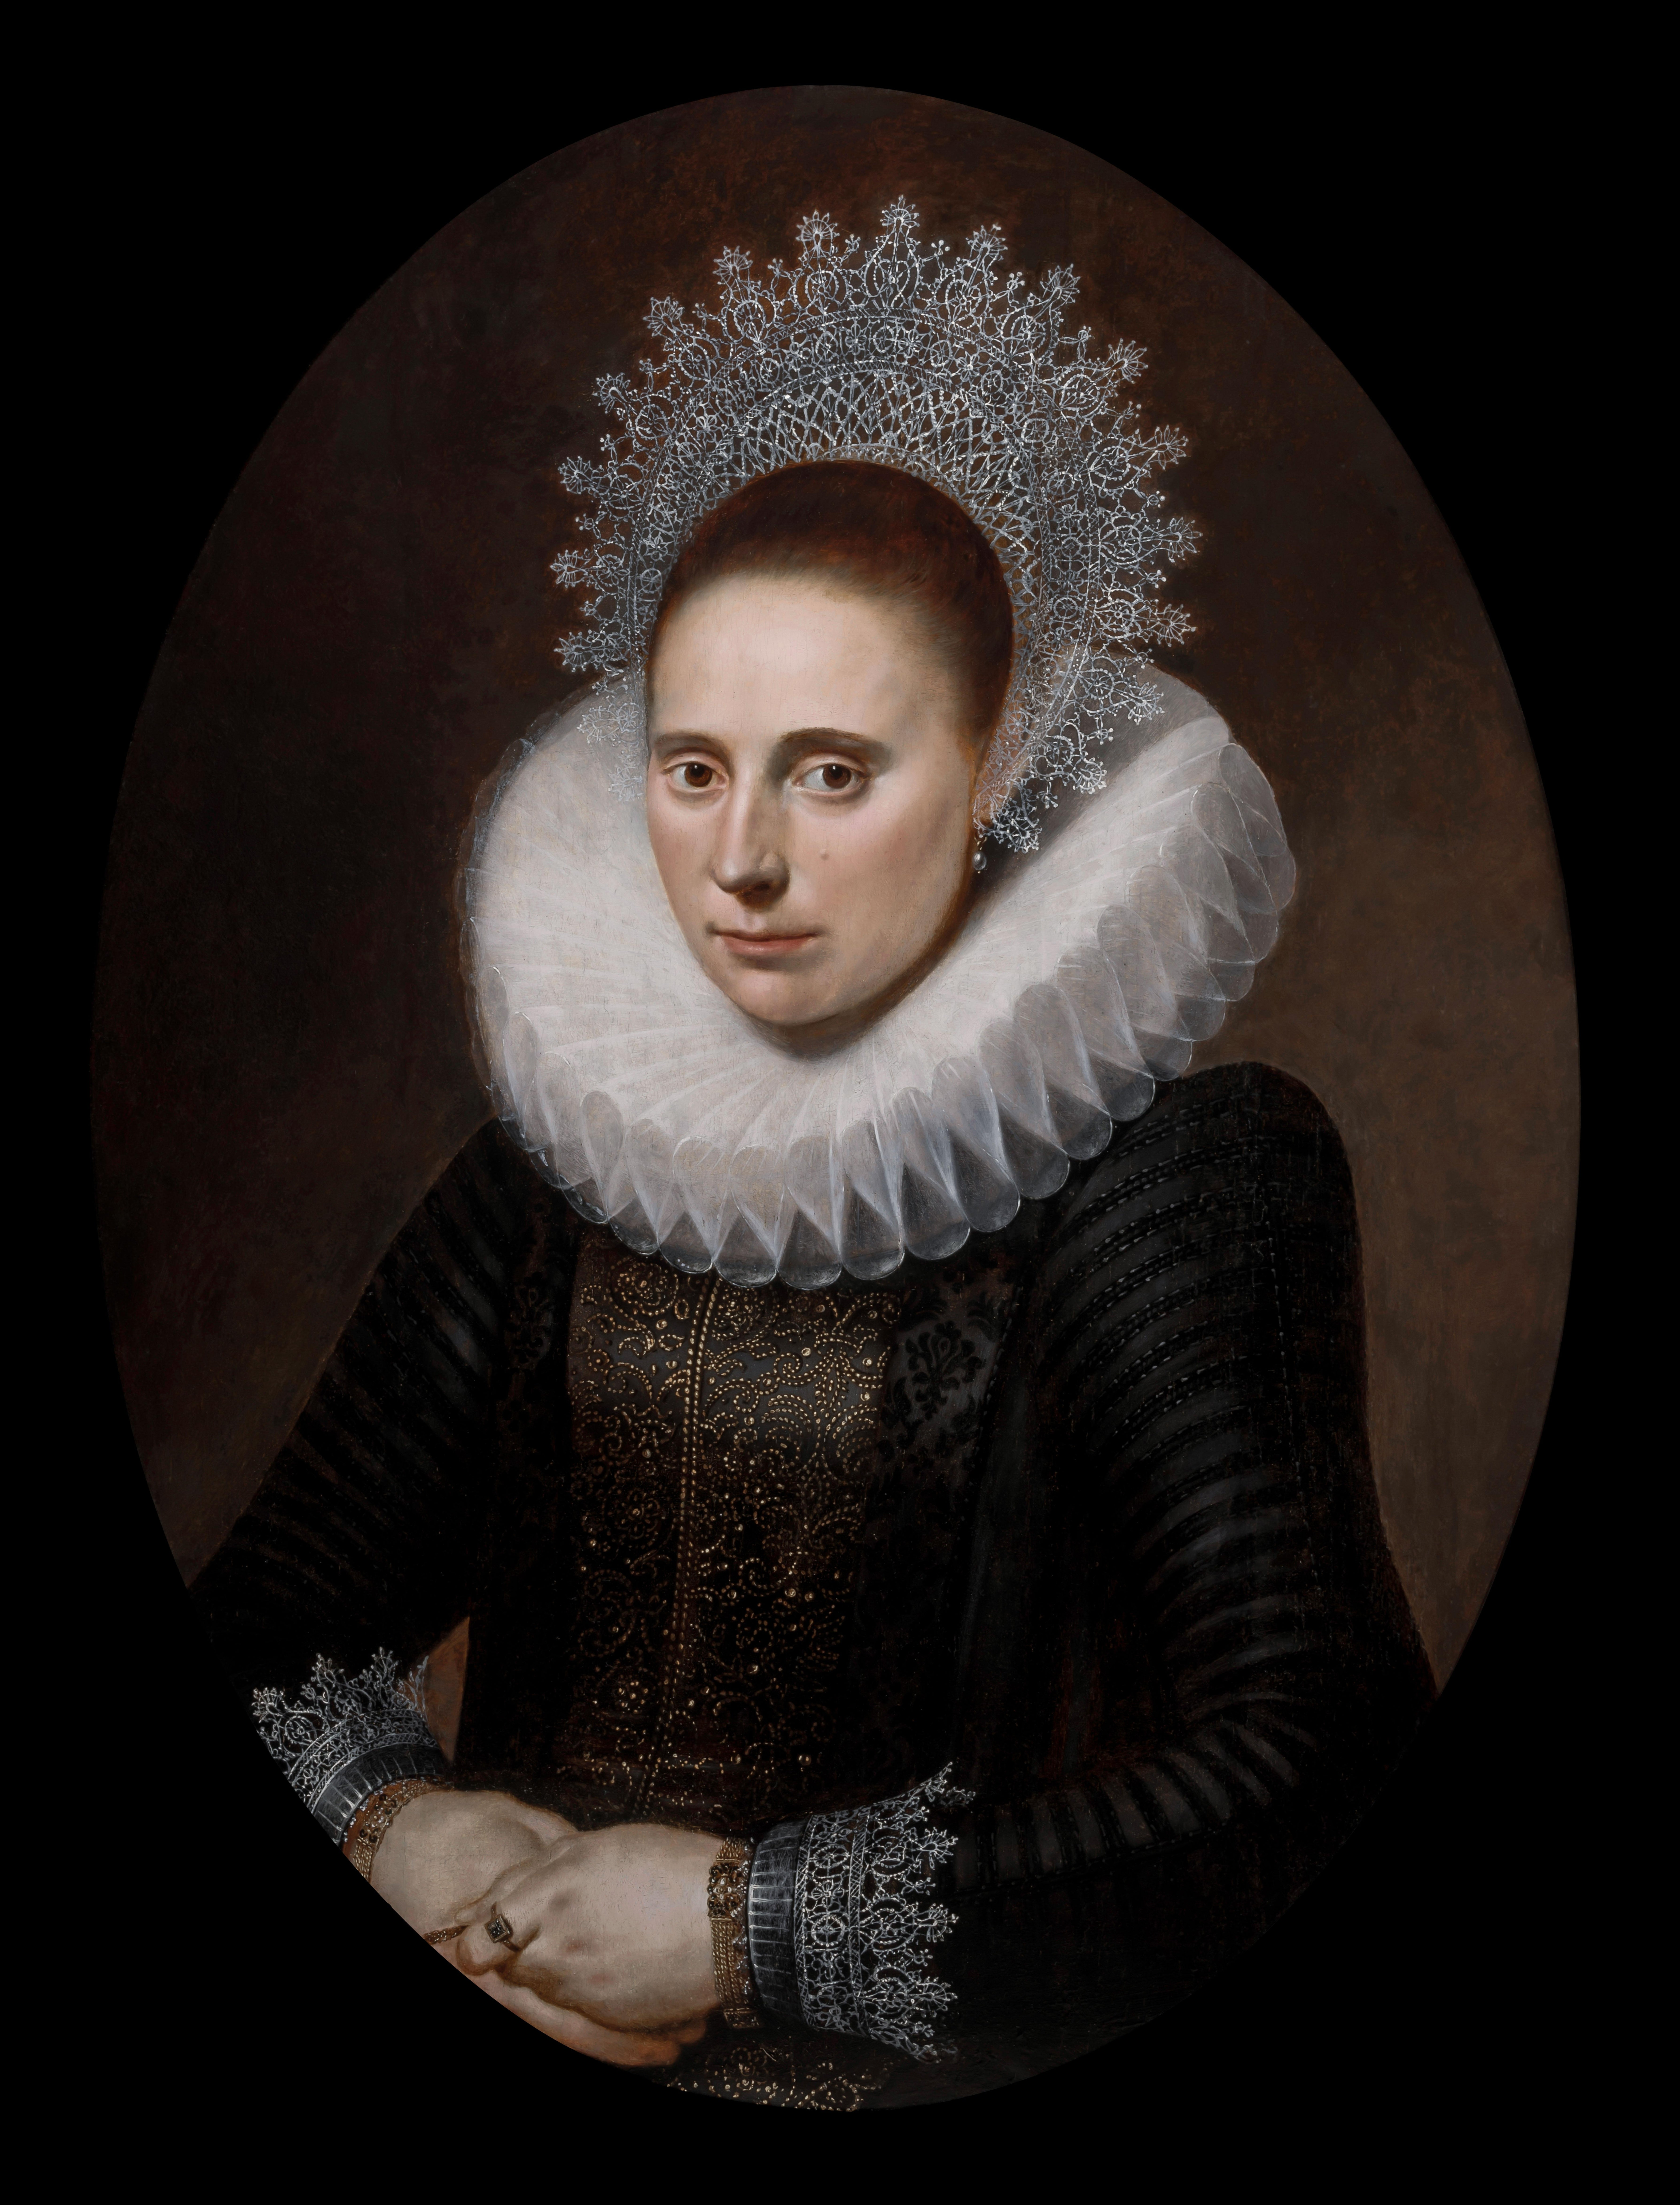 Portrait of a Lady in an Elaborate Ruff & Lace Coif c.1610-20, Dutch Old Master For Sale 1